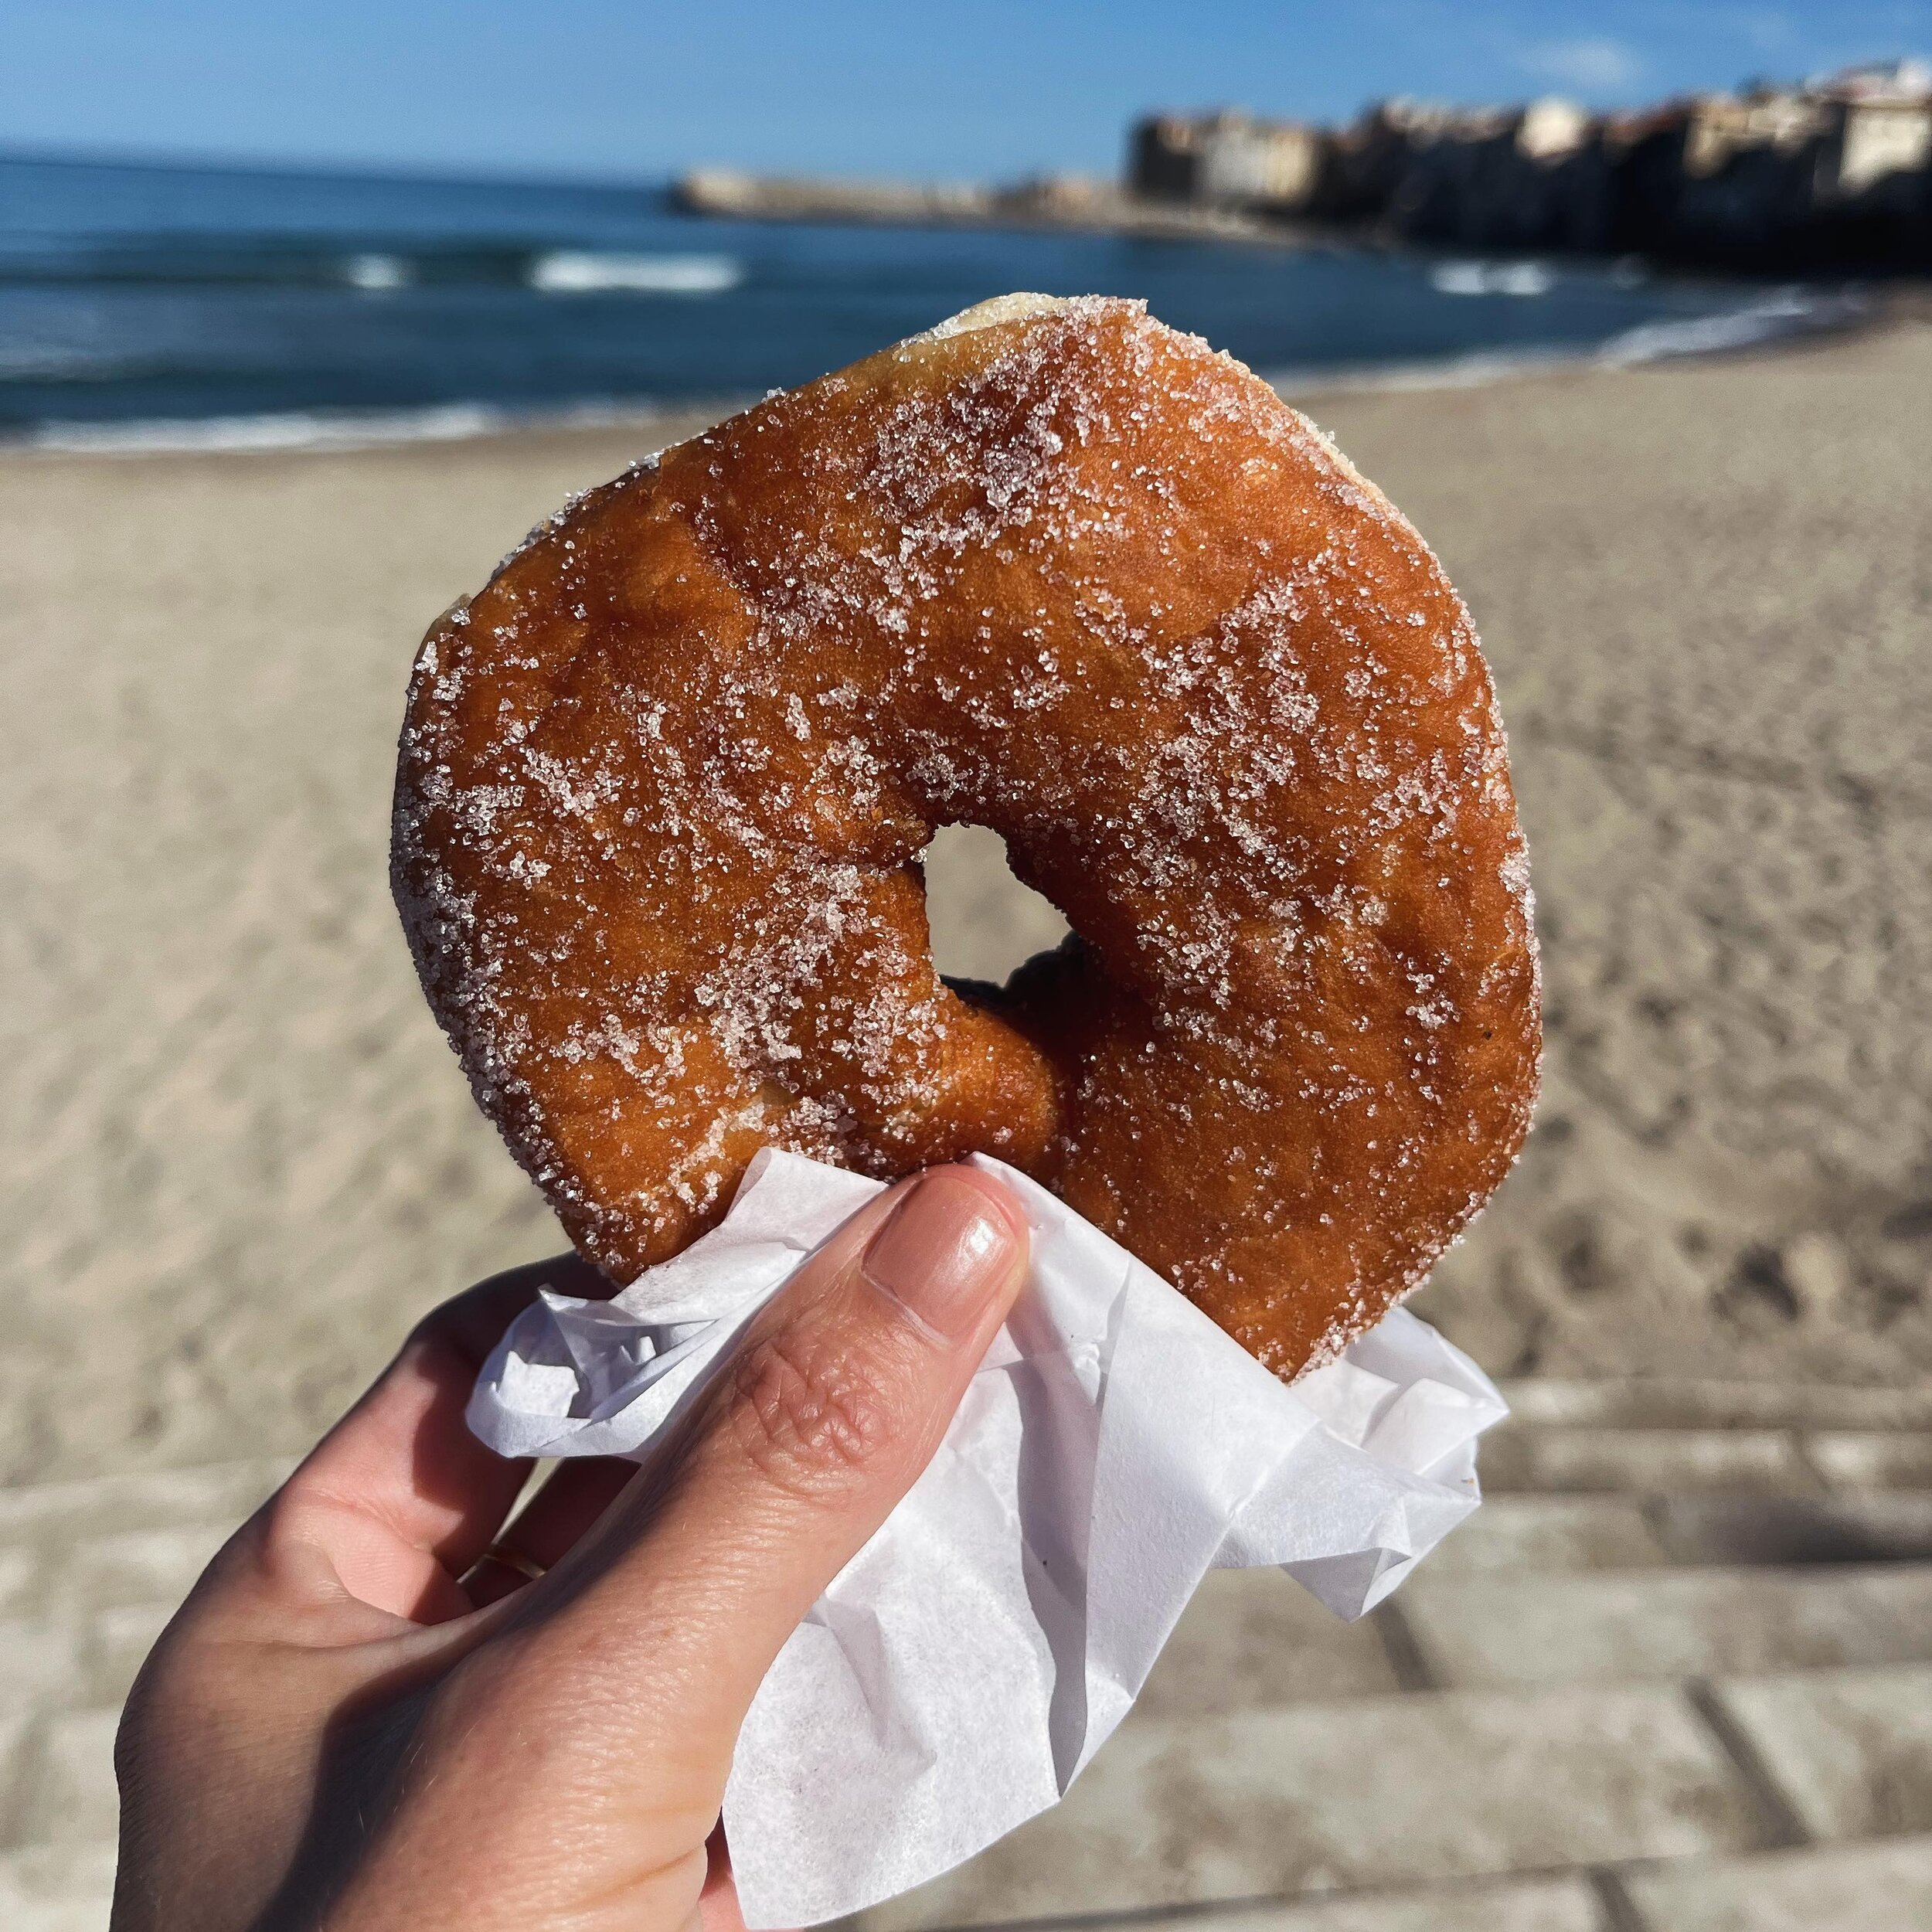 Sundays like this 🍩 

If you know me, you know I love a good donut. And while I miss the intriguing flavors and abundance of variety we have in the USA (and especially the maple sugar donuts in fall), there&rsquo;s really nothing like a good old fas